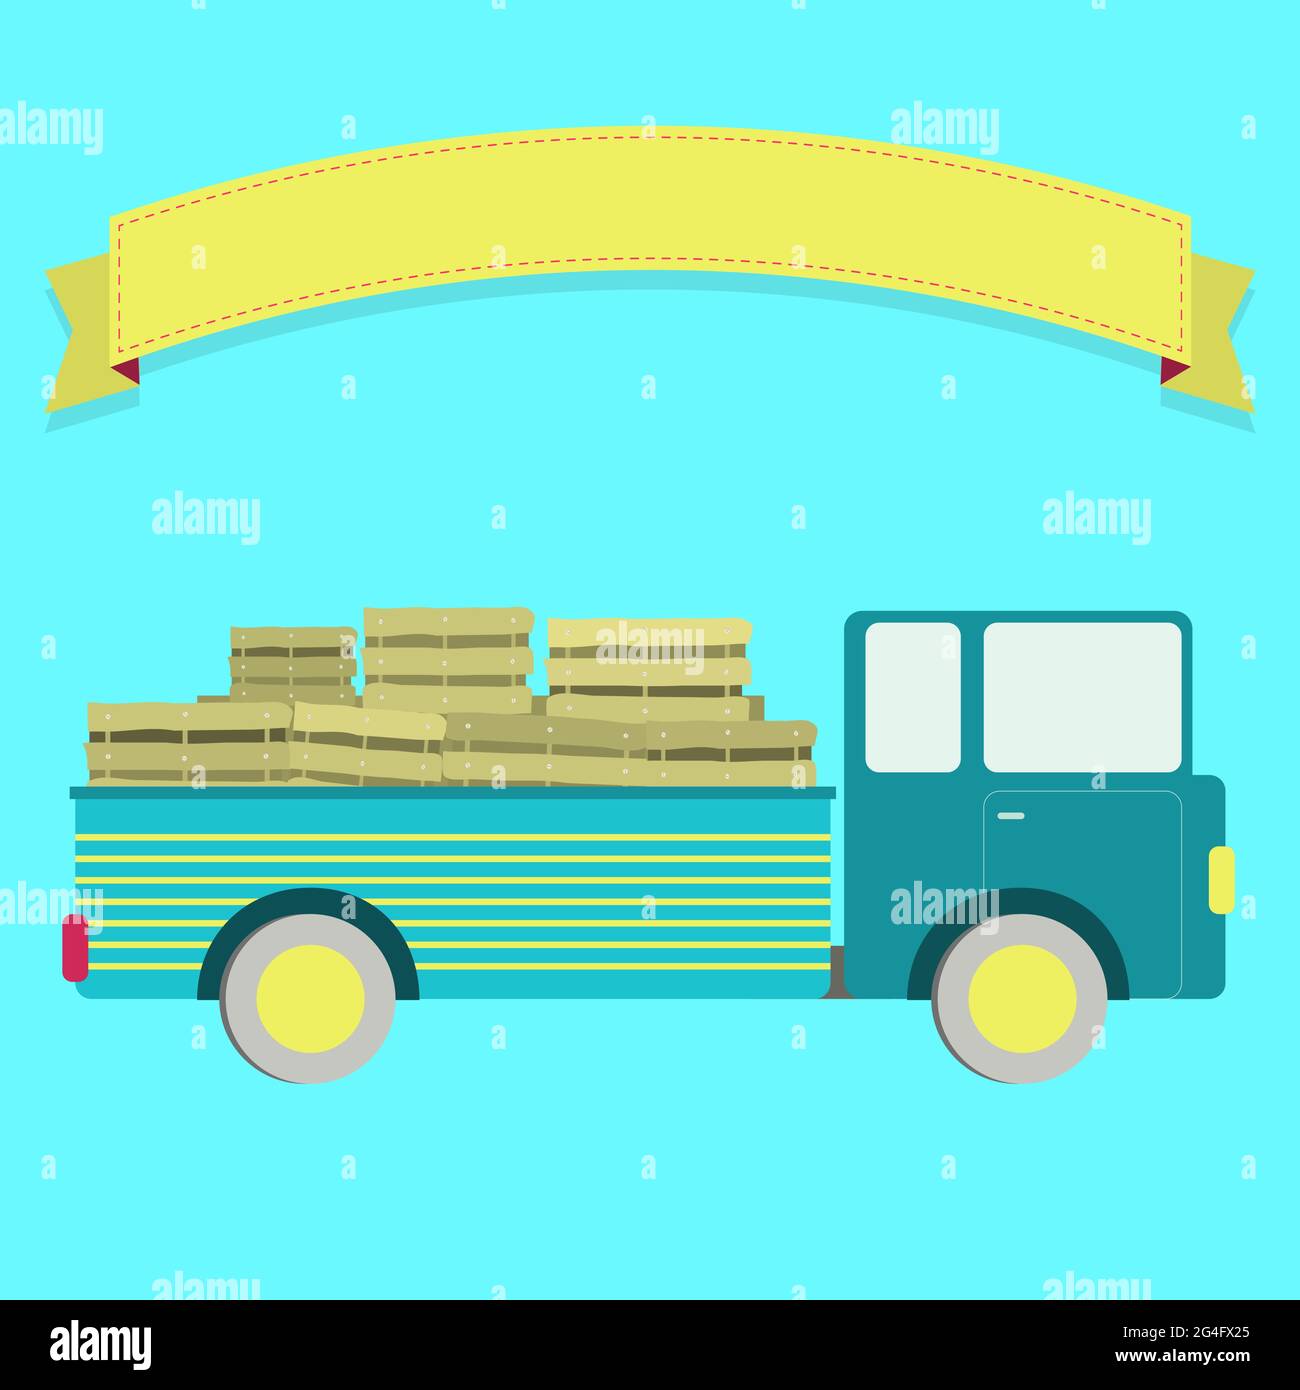 Truck carrying crates. Blank ribbon for insert text. Stock Vector